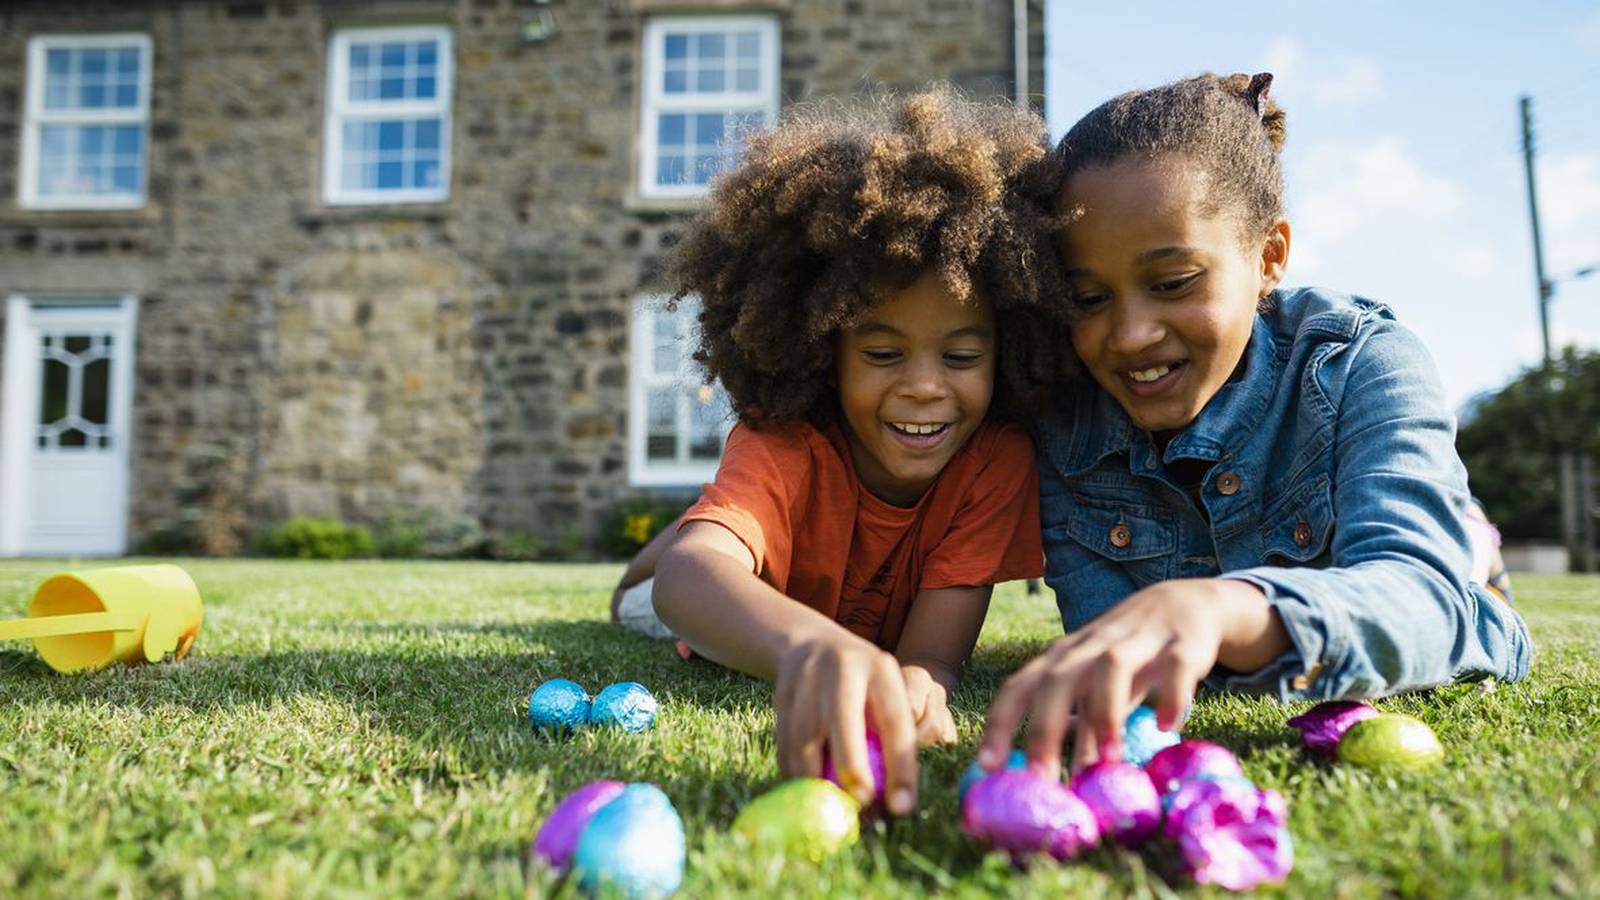 17 things to do around Ireland over the Easter holidays The Irish Times